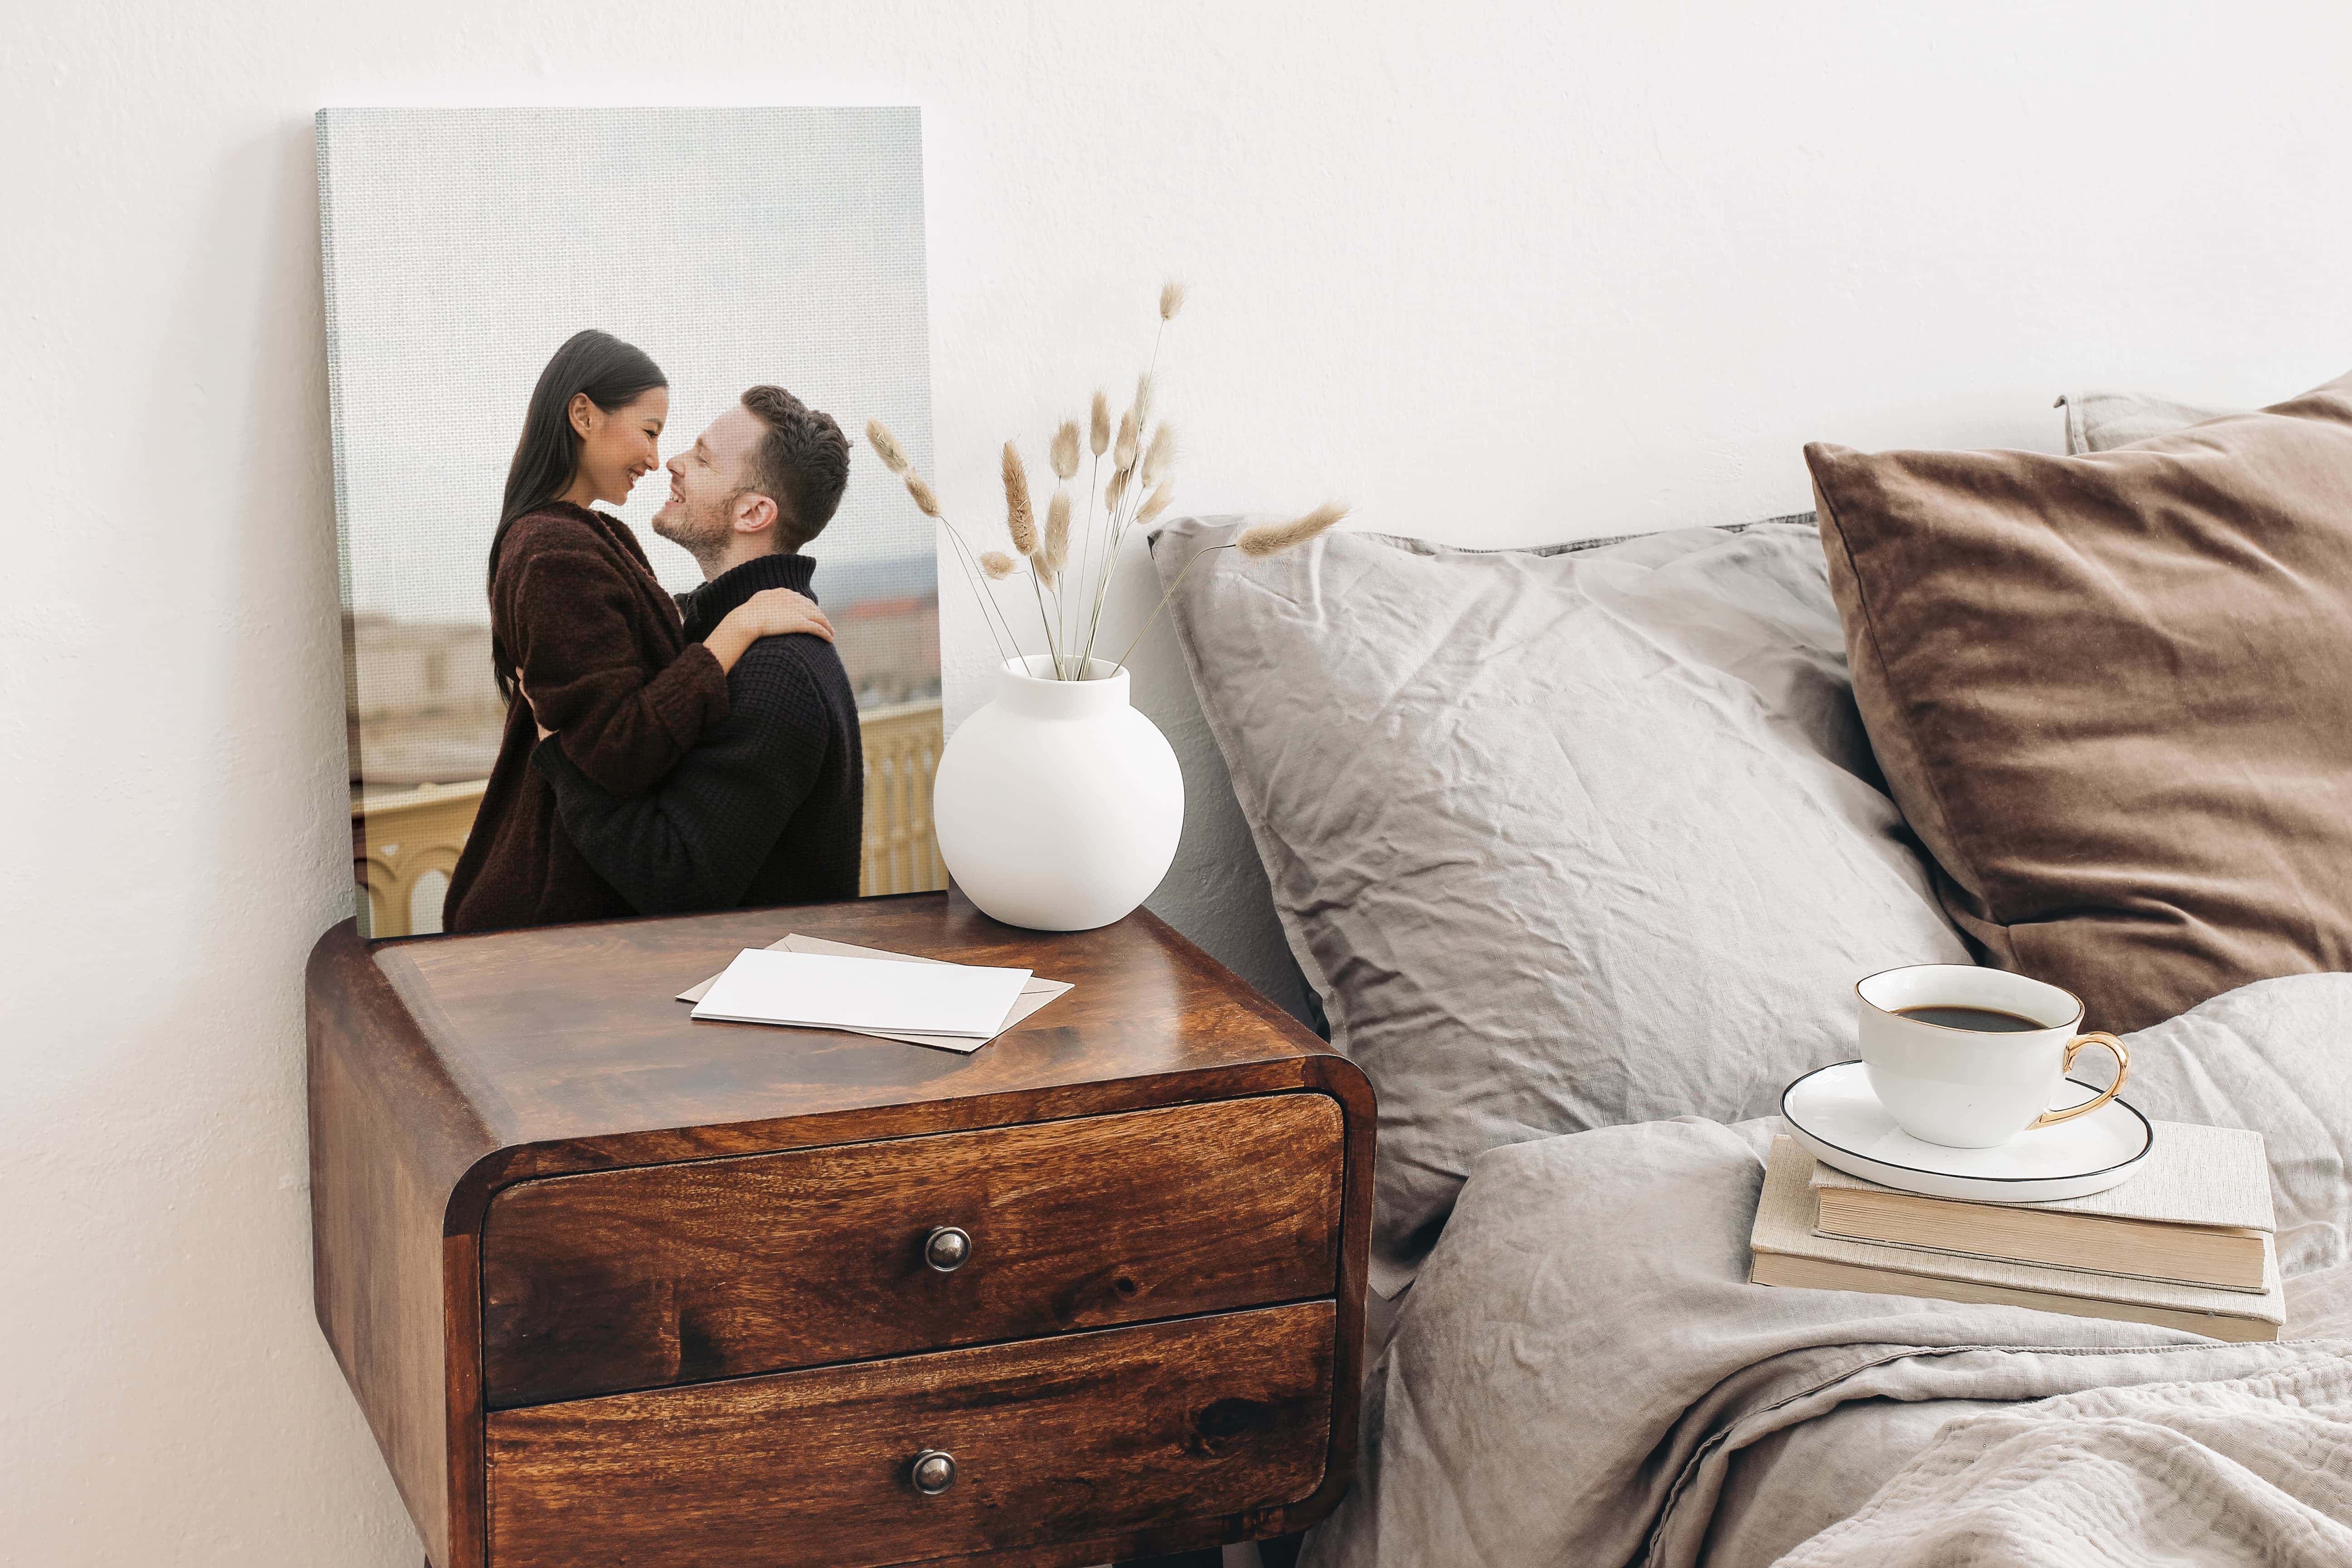 Canvas print on side table of couple